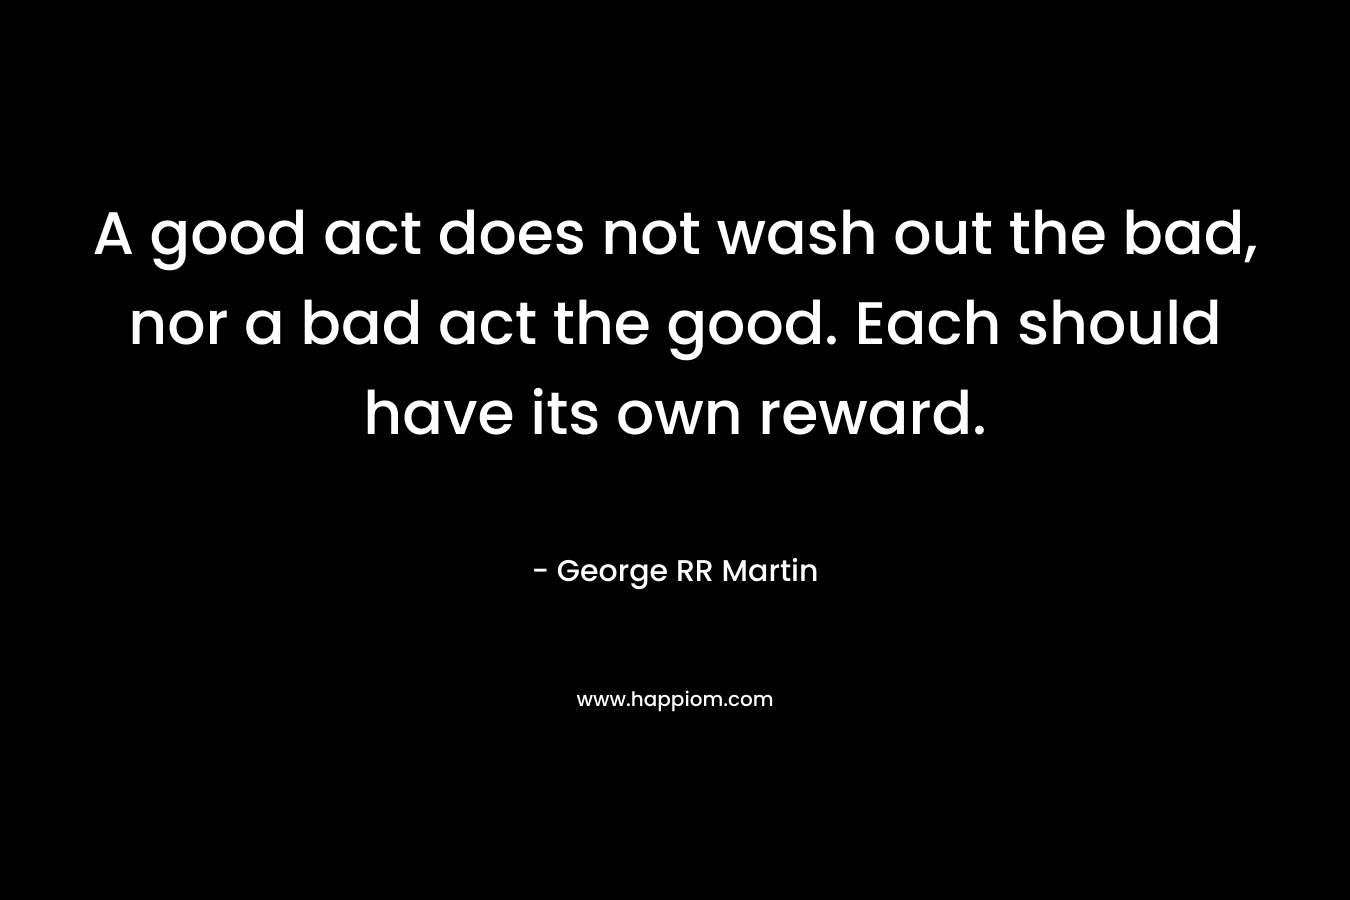 A good act does not wash out the bad, nor a bad act the good. Each should have its own reward.